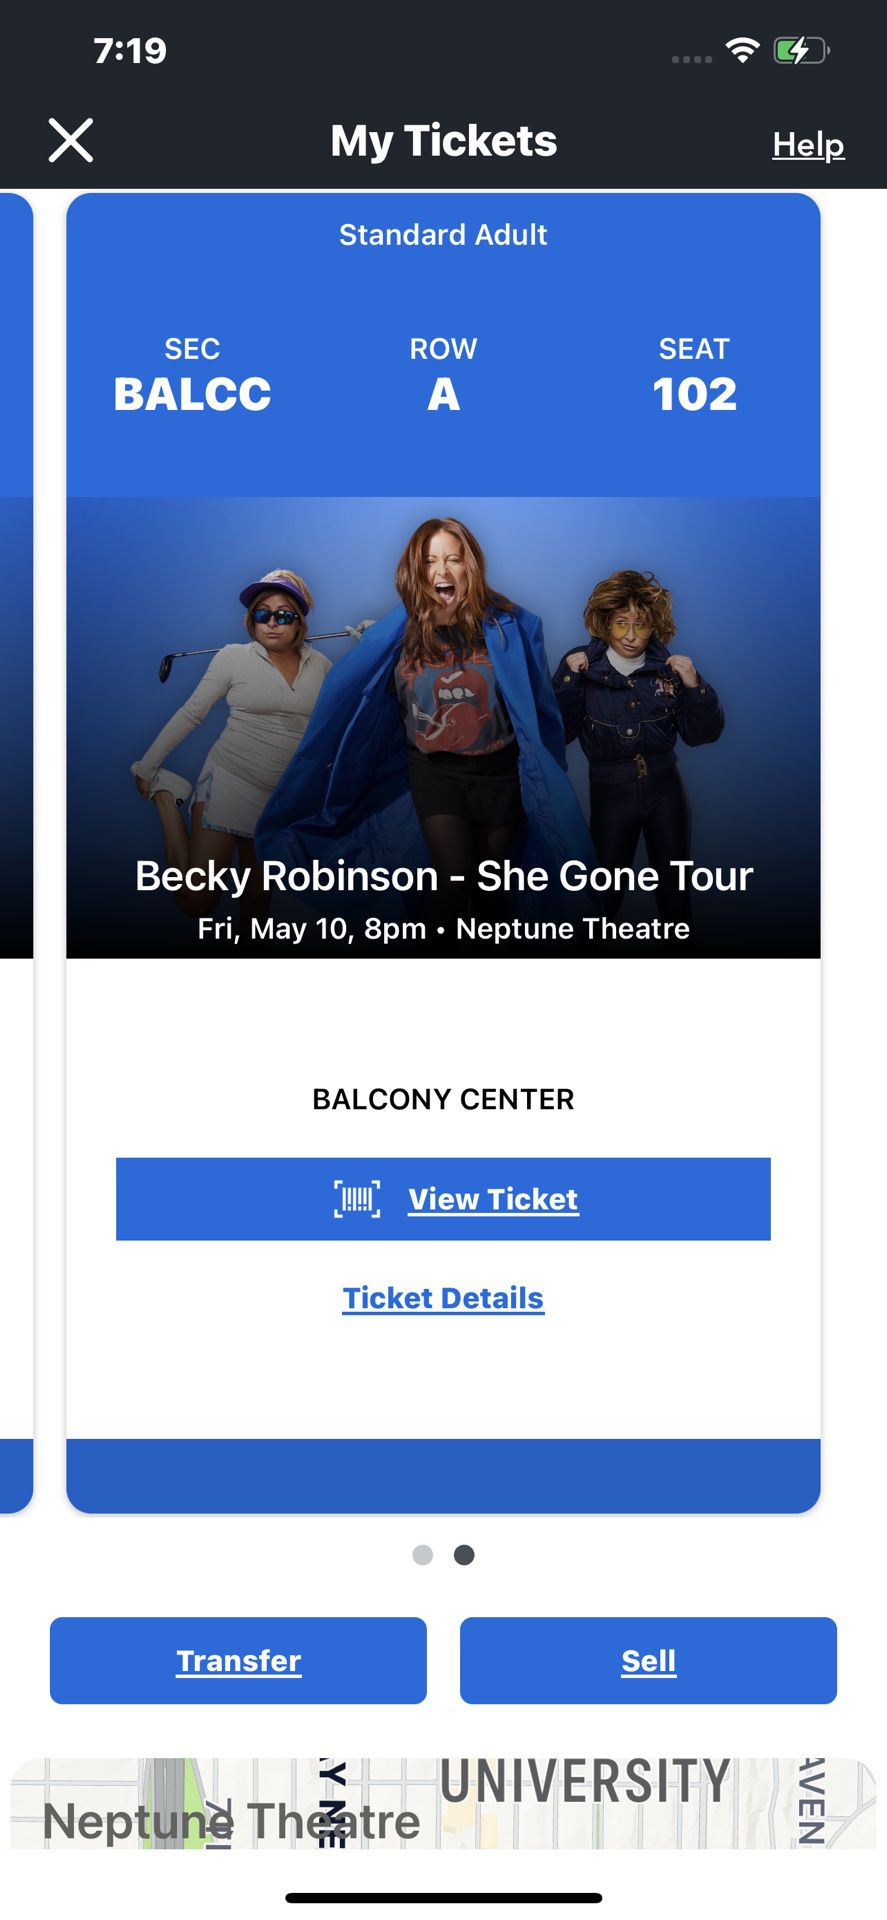 BECKY ROBINSON - SHES GONE TOUR